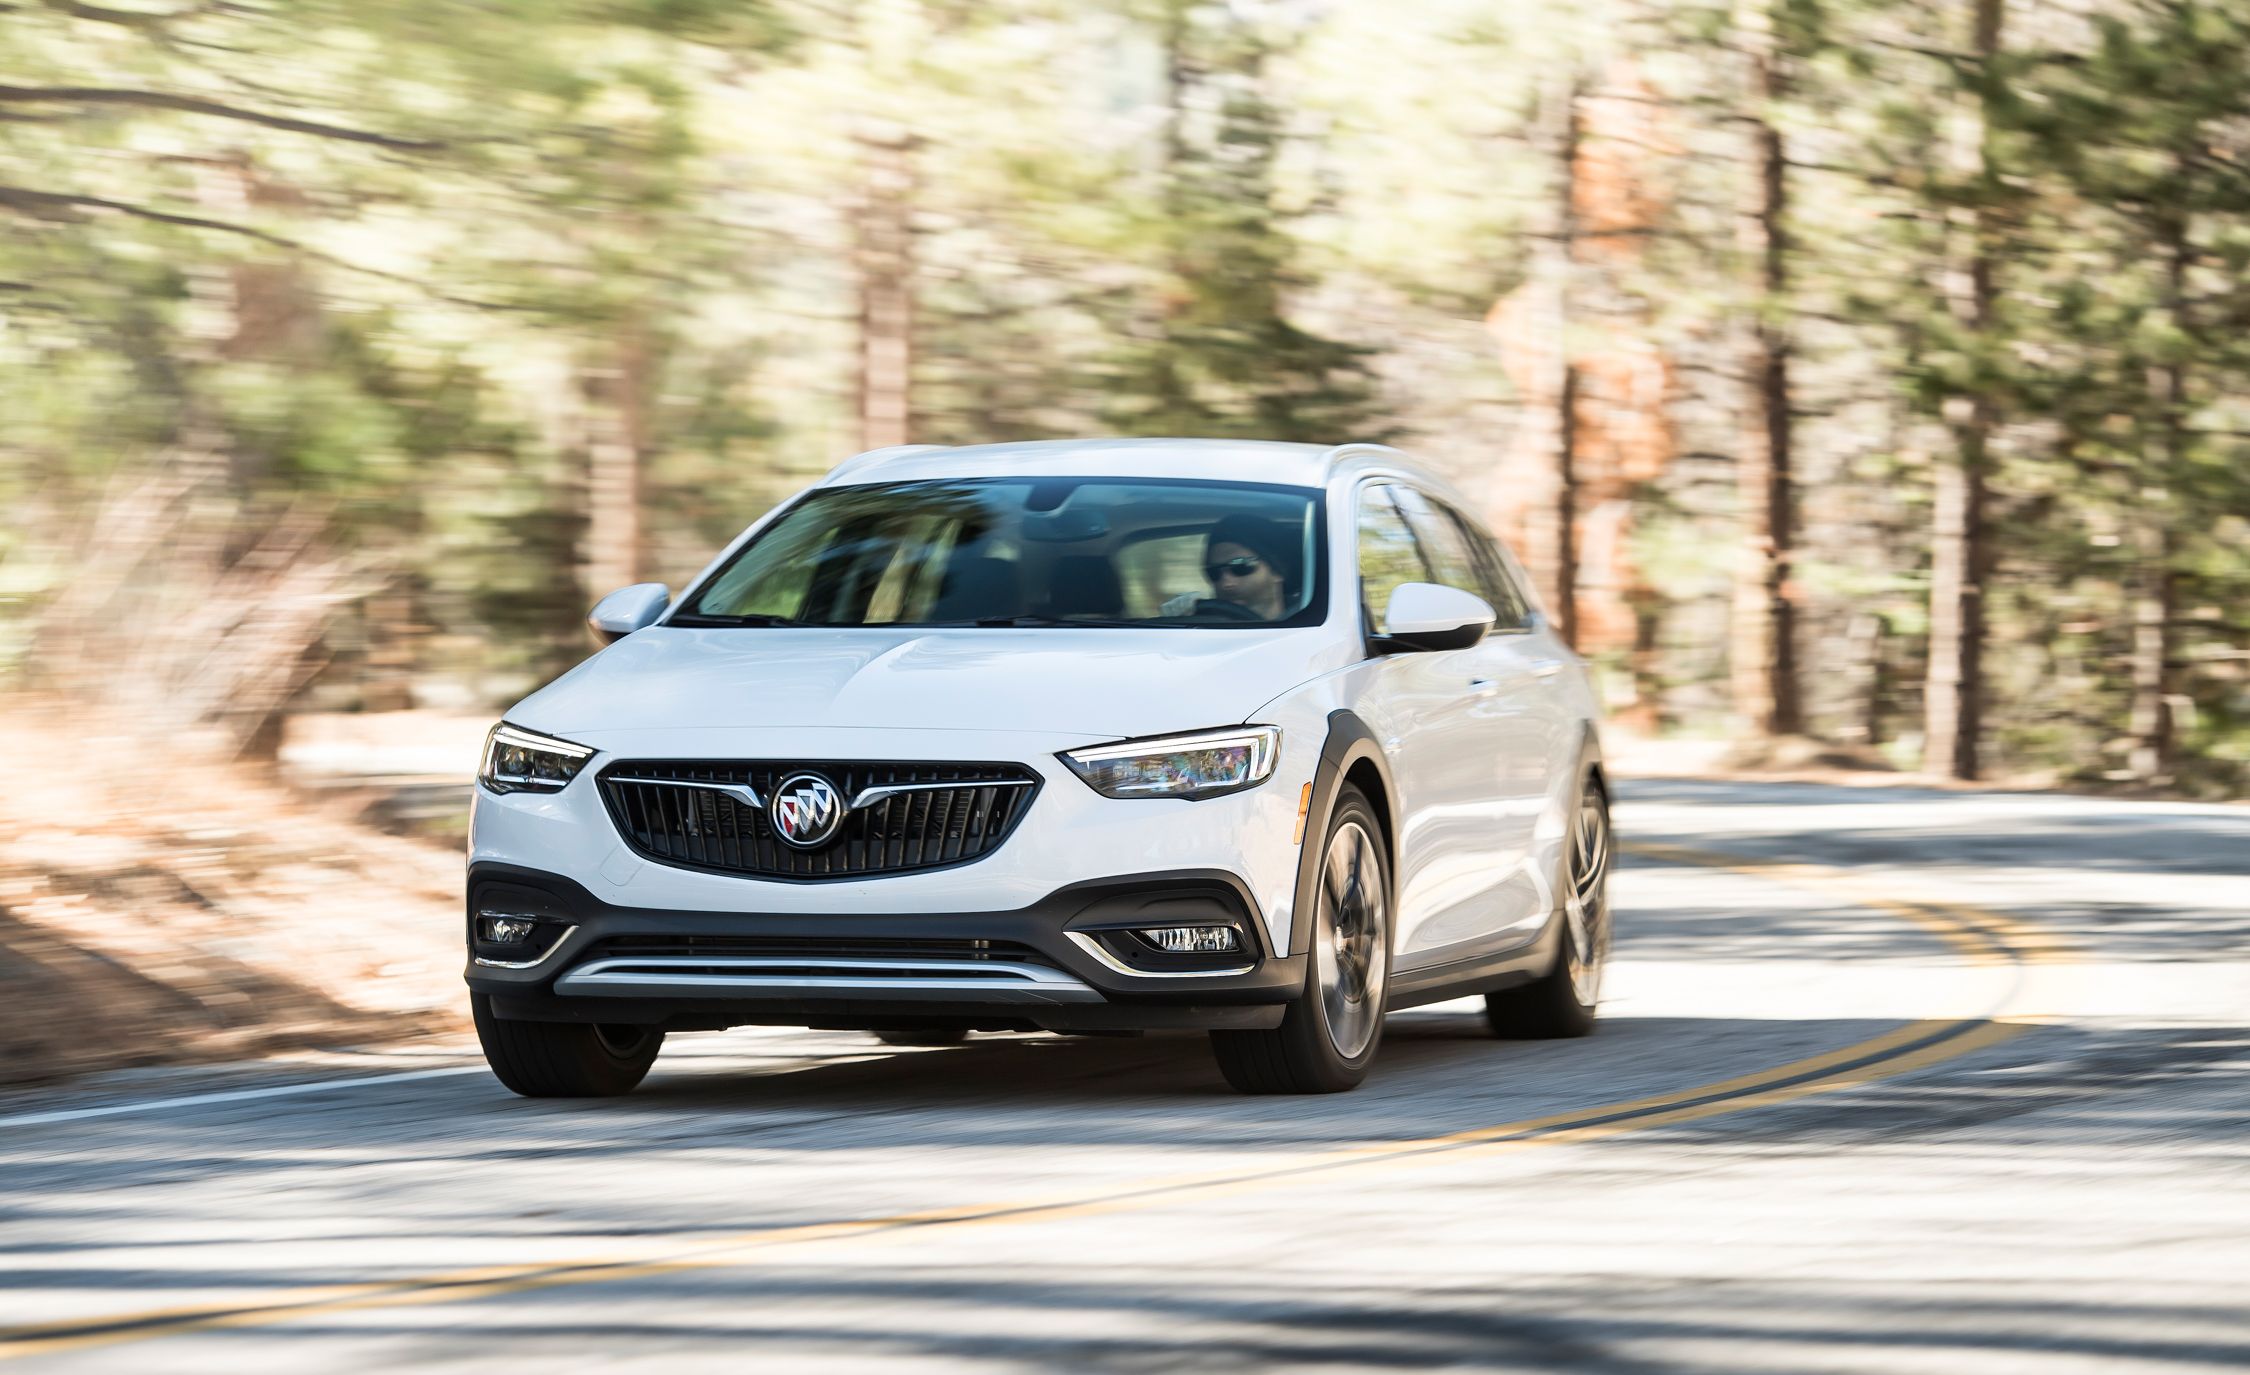 X Games: 2018 Buick Regal TourX Tested!